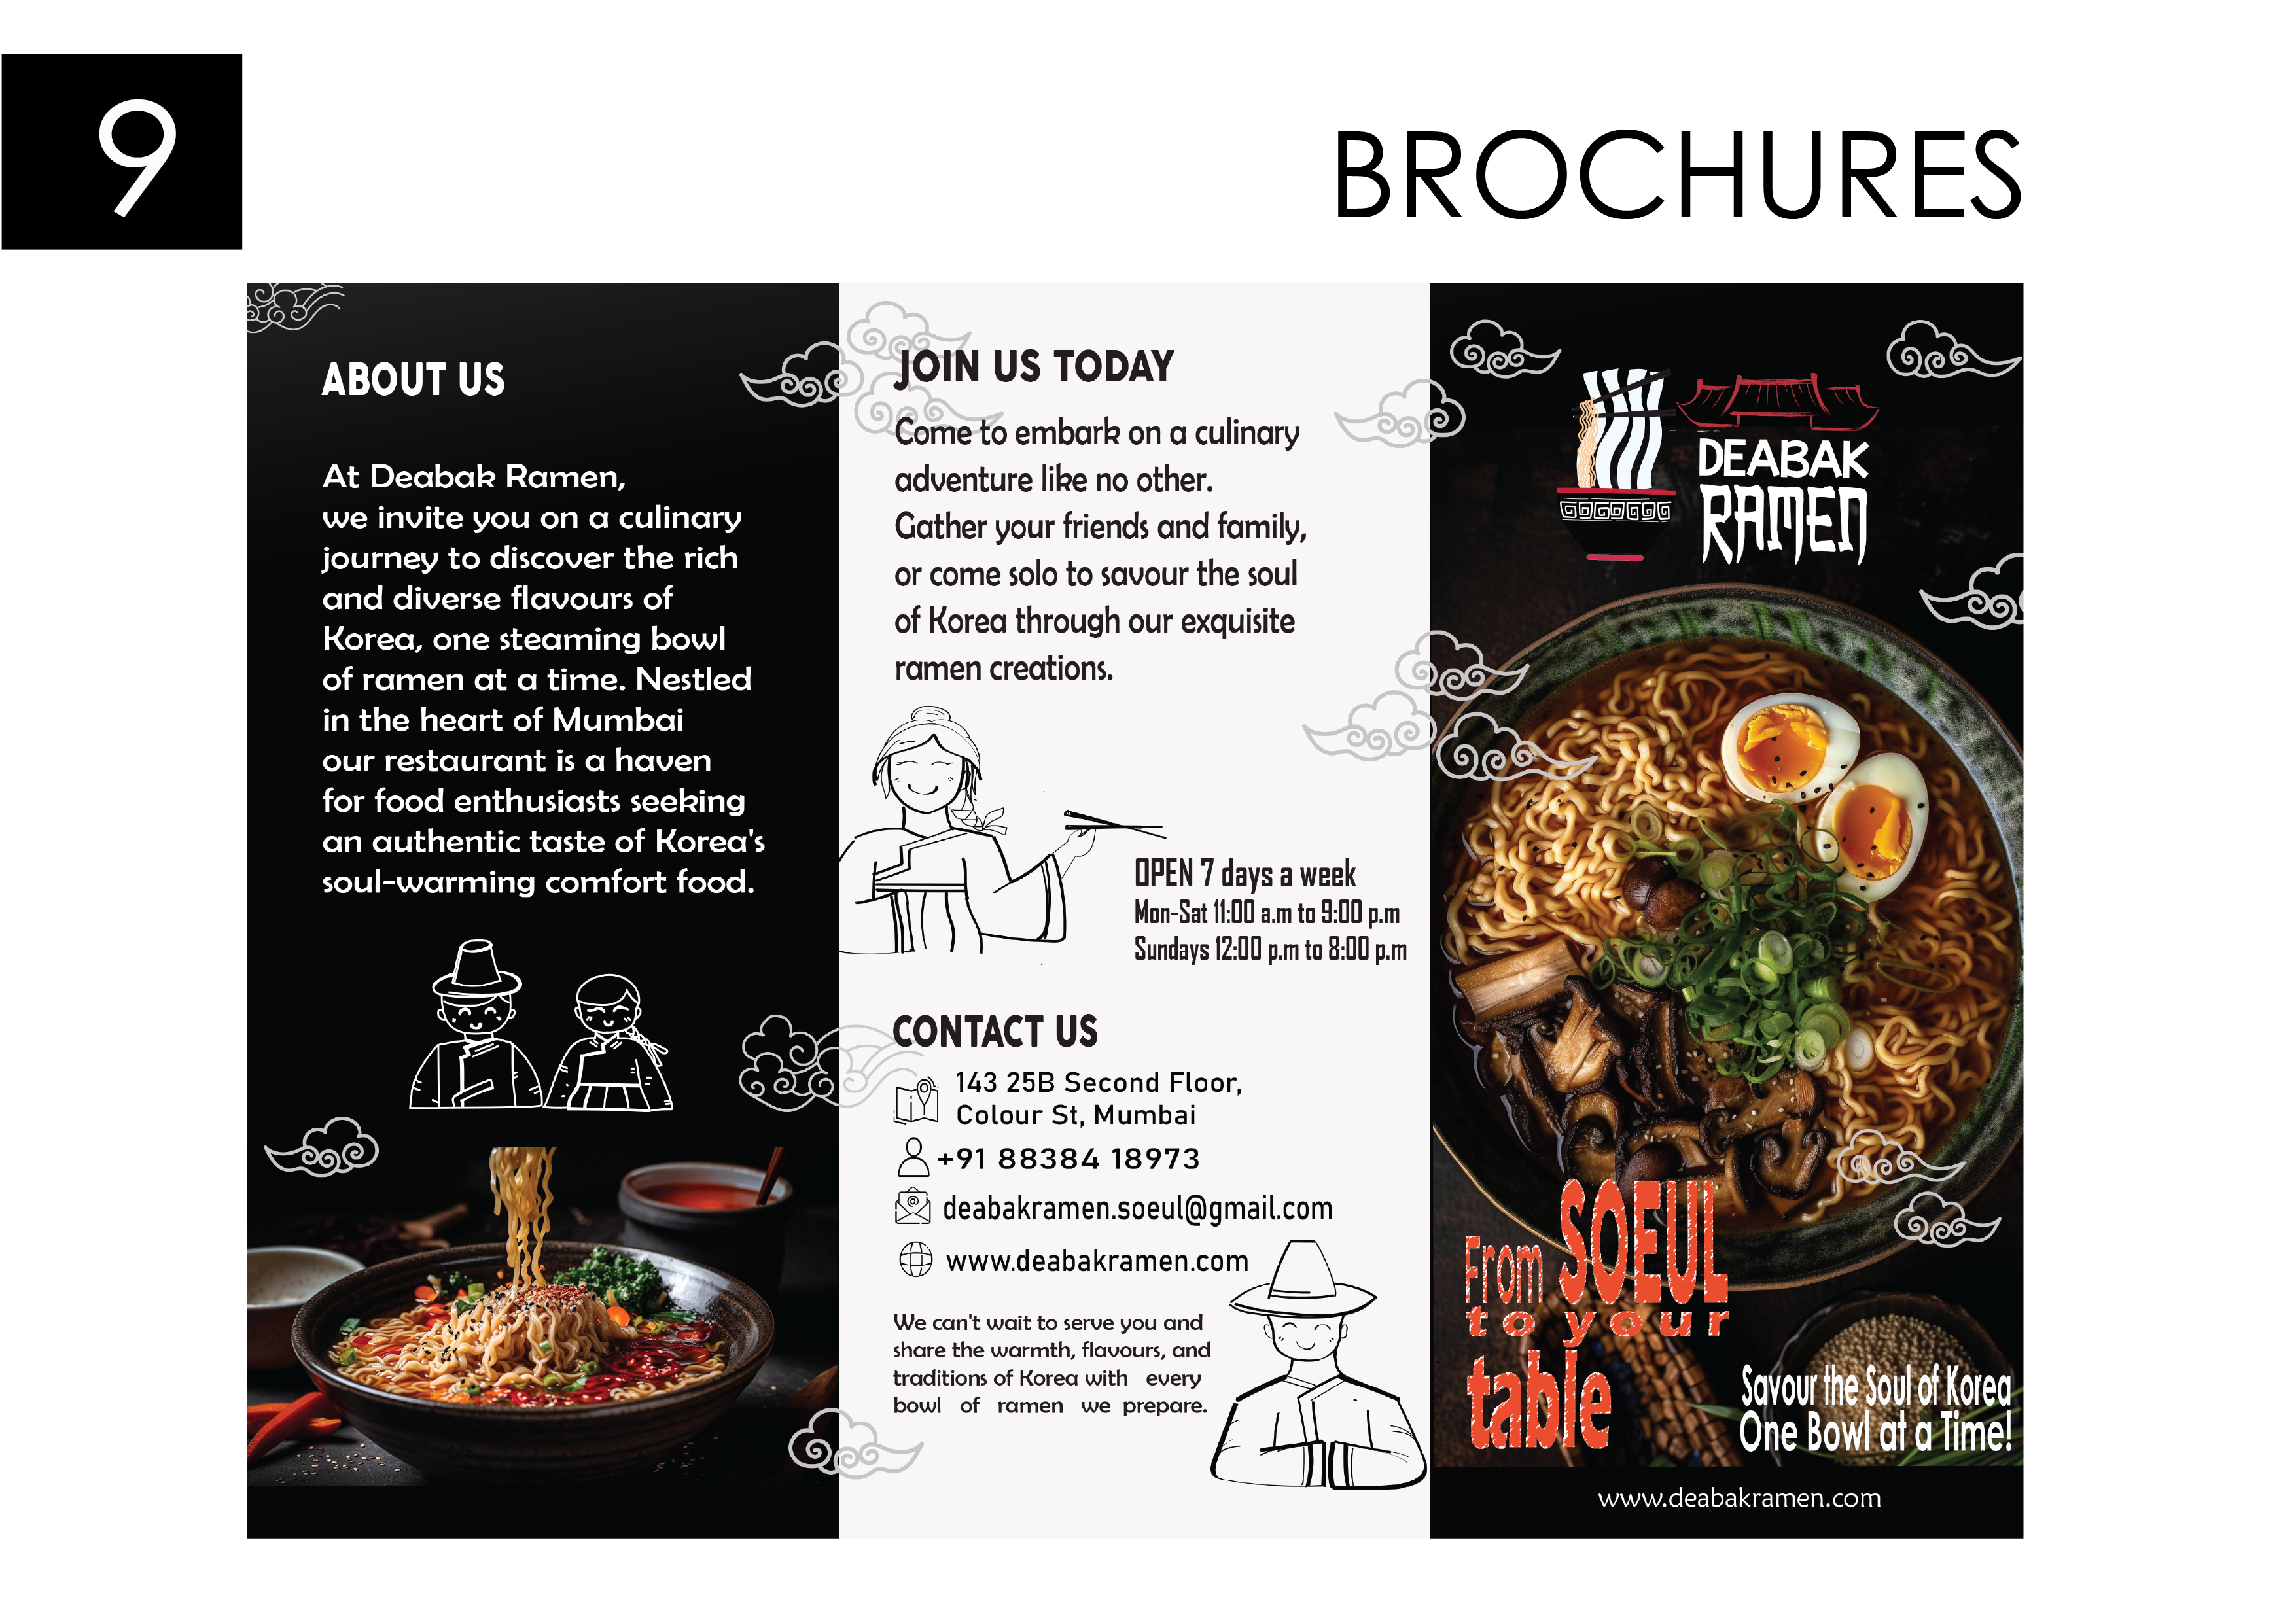 BROCHURES

ABOUT US JOIN US TODAY

Come to embark on a culinary
At Deabak Ramen, adventure like no other.
we invite you on a culinary Gather your friends and family,

journey to discover the rich
and diverse flavours of
Korea, one steaming bowl )
of ramen at a time. Nestled ramen creations.
in the heart of Mumbai

our restaurant is a haven

for food enthusiasts seeking
an authentic taste of Korea's

soul-warming comfort food. OPEN 7 days a week
Mon-Sat 11:00 a.m to 3:00 p.m

Sundays 12:00 p.m to 8:00 p.m

or come solo to savour the soul
of Korea through our exquisite

CONTACT US

or 143 25B Second Floor,
& Colour St, Mumbai

2 +91 88384 18973
&) deabakramen.soeul@gmail.com

€h www.deabakramen.com /

We can't wait to serve you and ¢ ) i 3 vy a on

share the warmth, flavours, and A ! : ¥: TTX XY)

traditions of Korea with every ¢ XY 3 A

bowl of ramen we prepare. : | 1 Savour | Rho Le
[ aN HINES ESTER

www.deabakramen.com